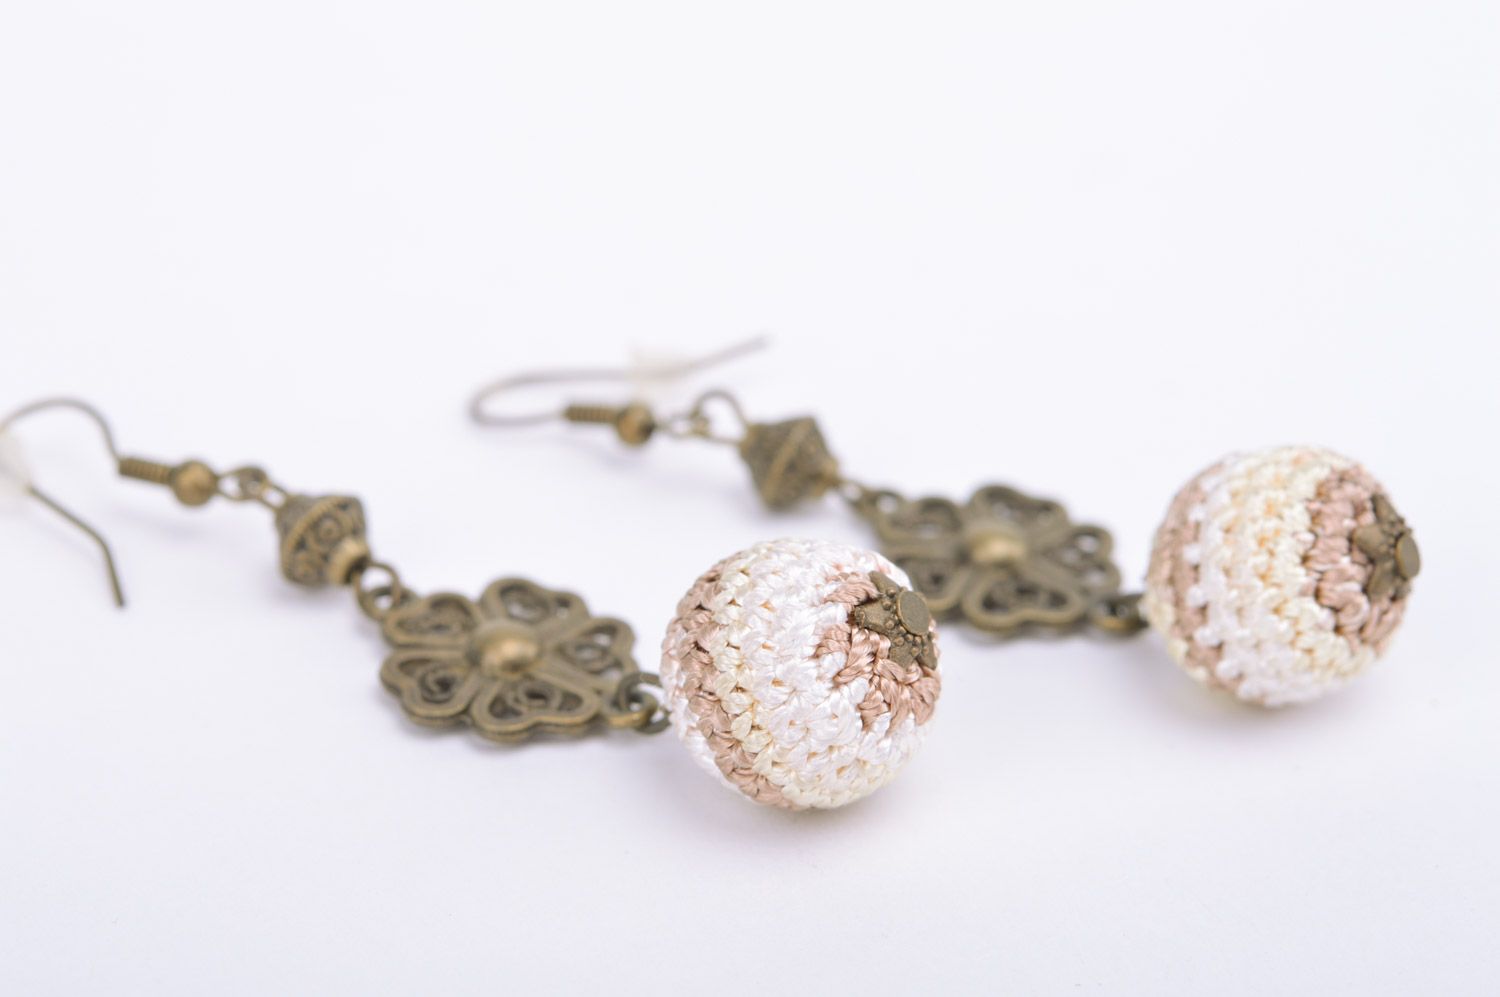 Handmade dangle earrings with metal fittings and light crocheted over beads photo 1